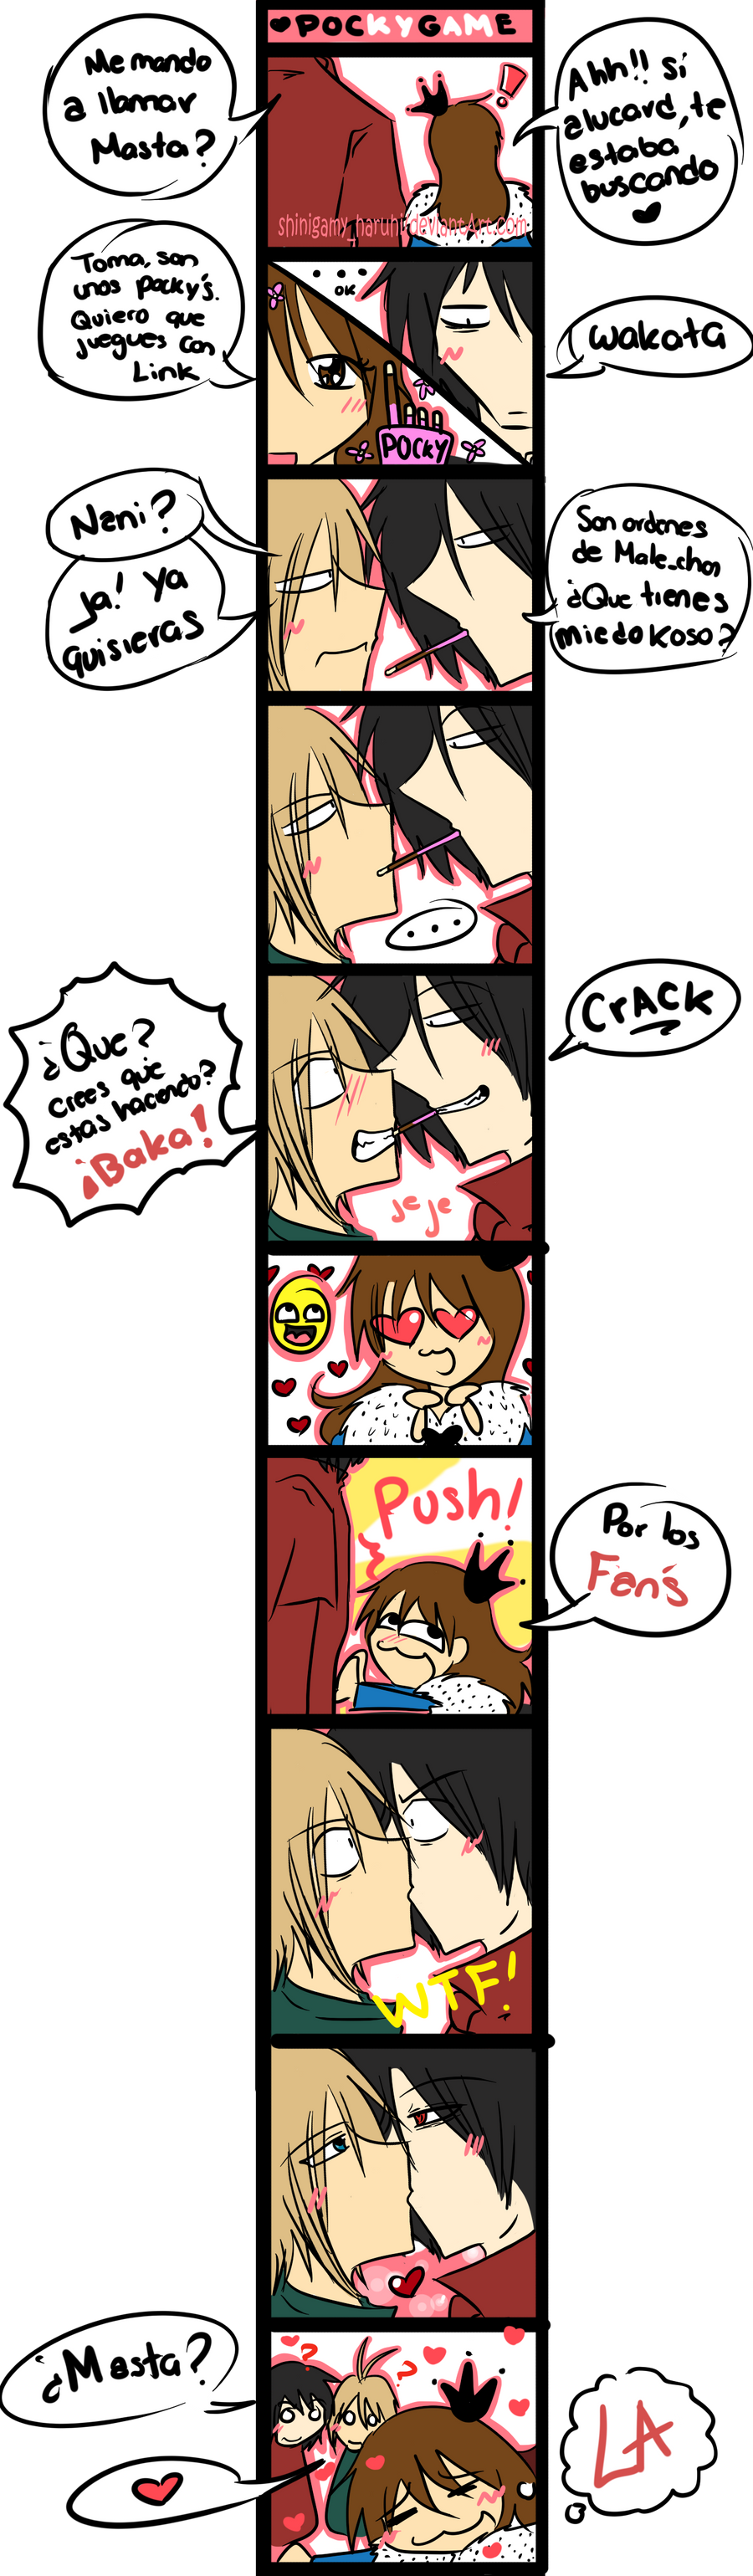 How to play the pocky game